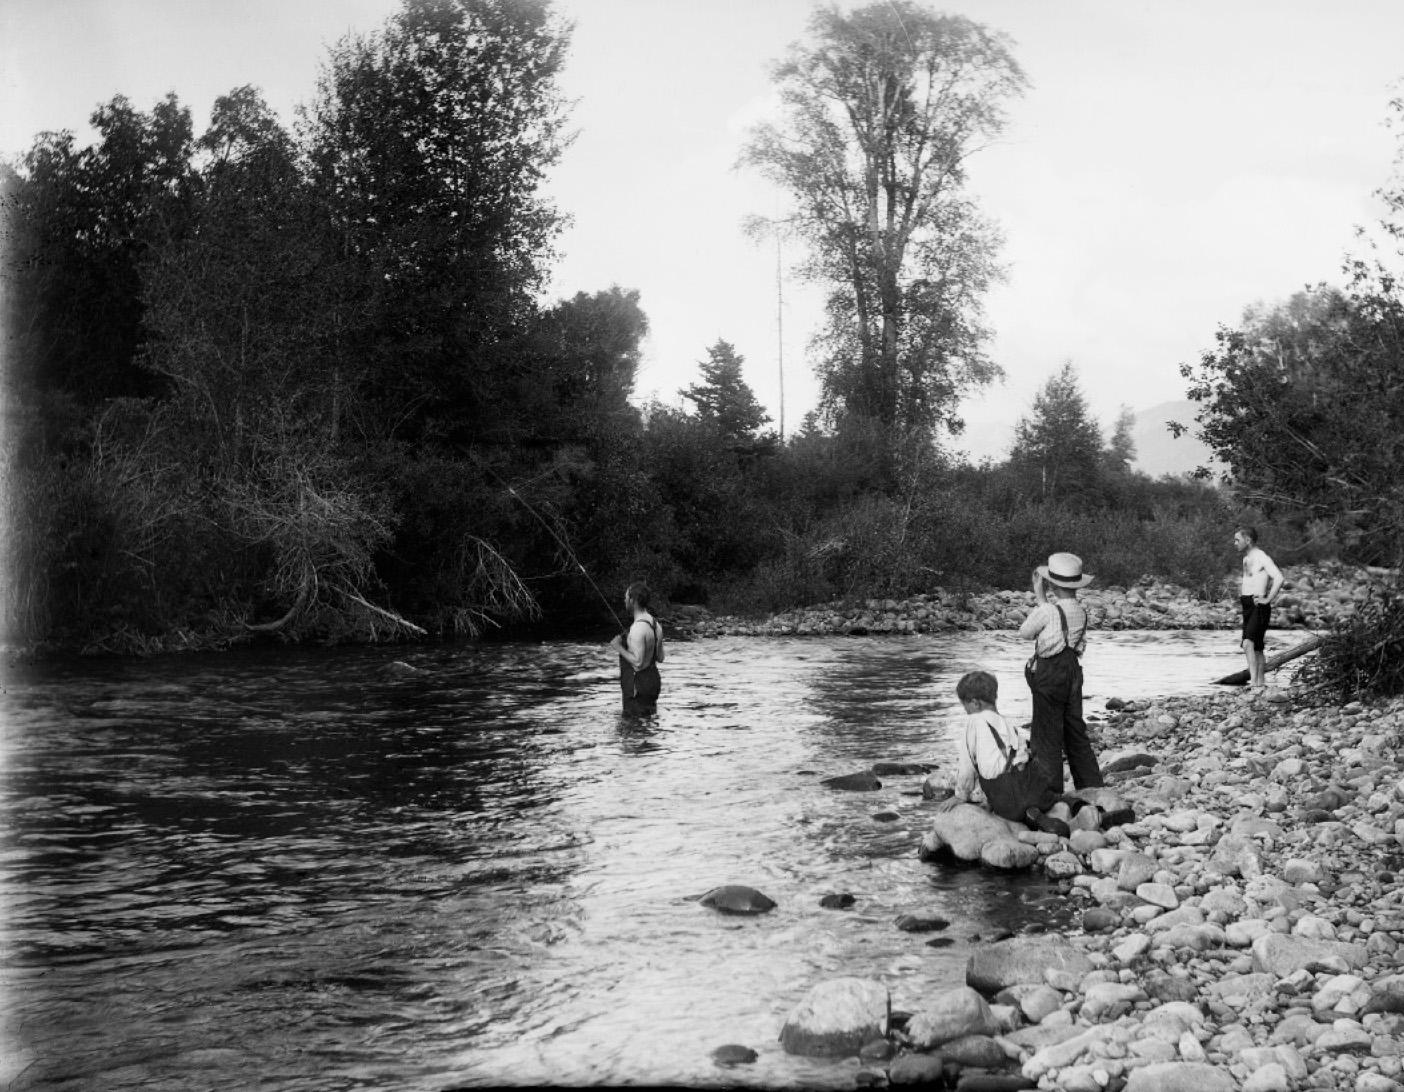 A black and white photo of young boys fishing and wading in a river